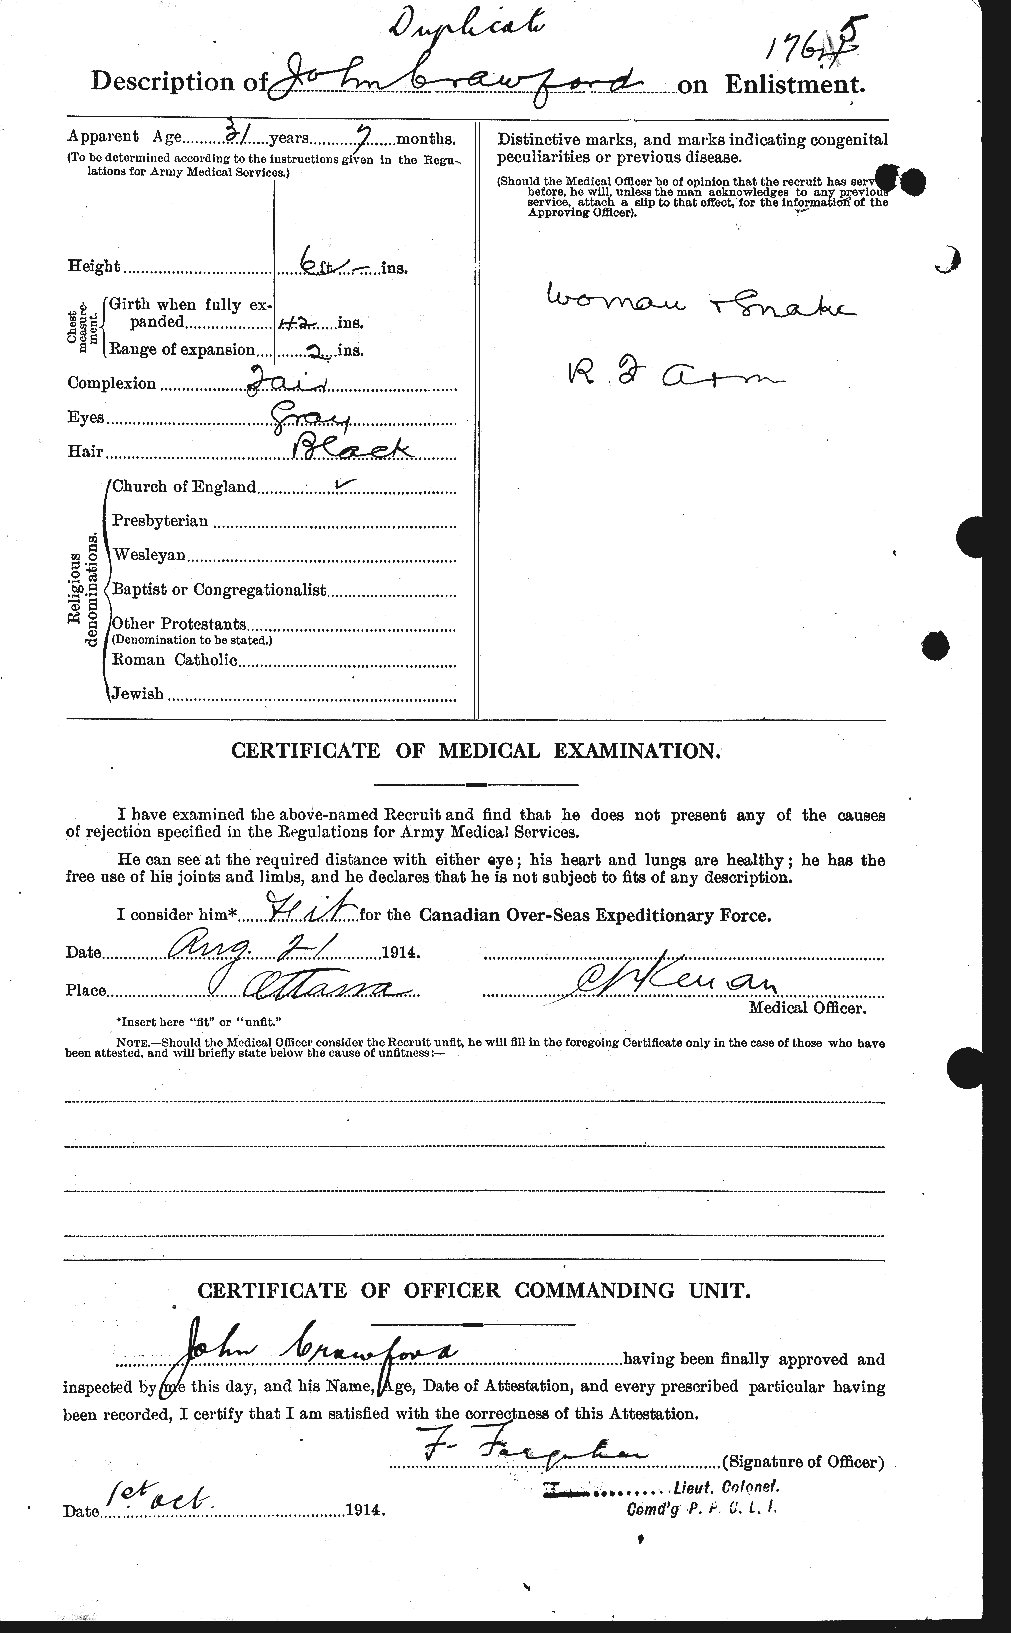 Personnel Records of the First World War - CEF 062441b